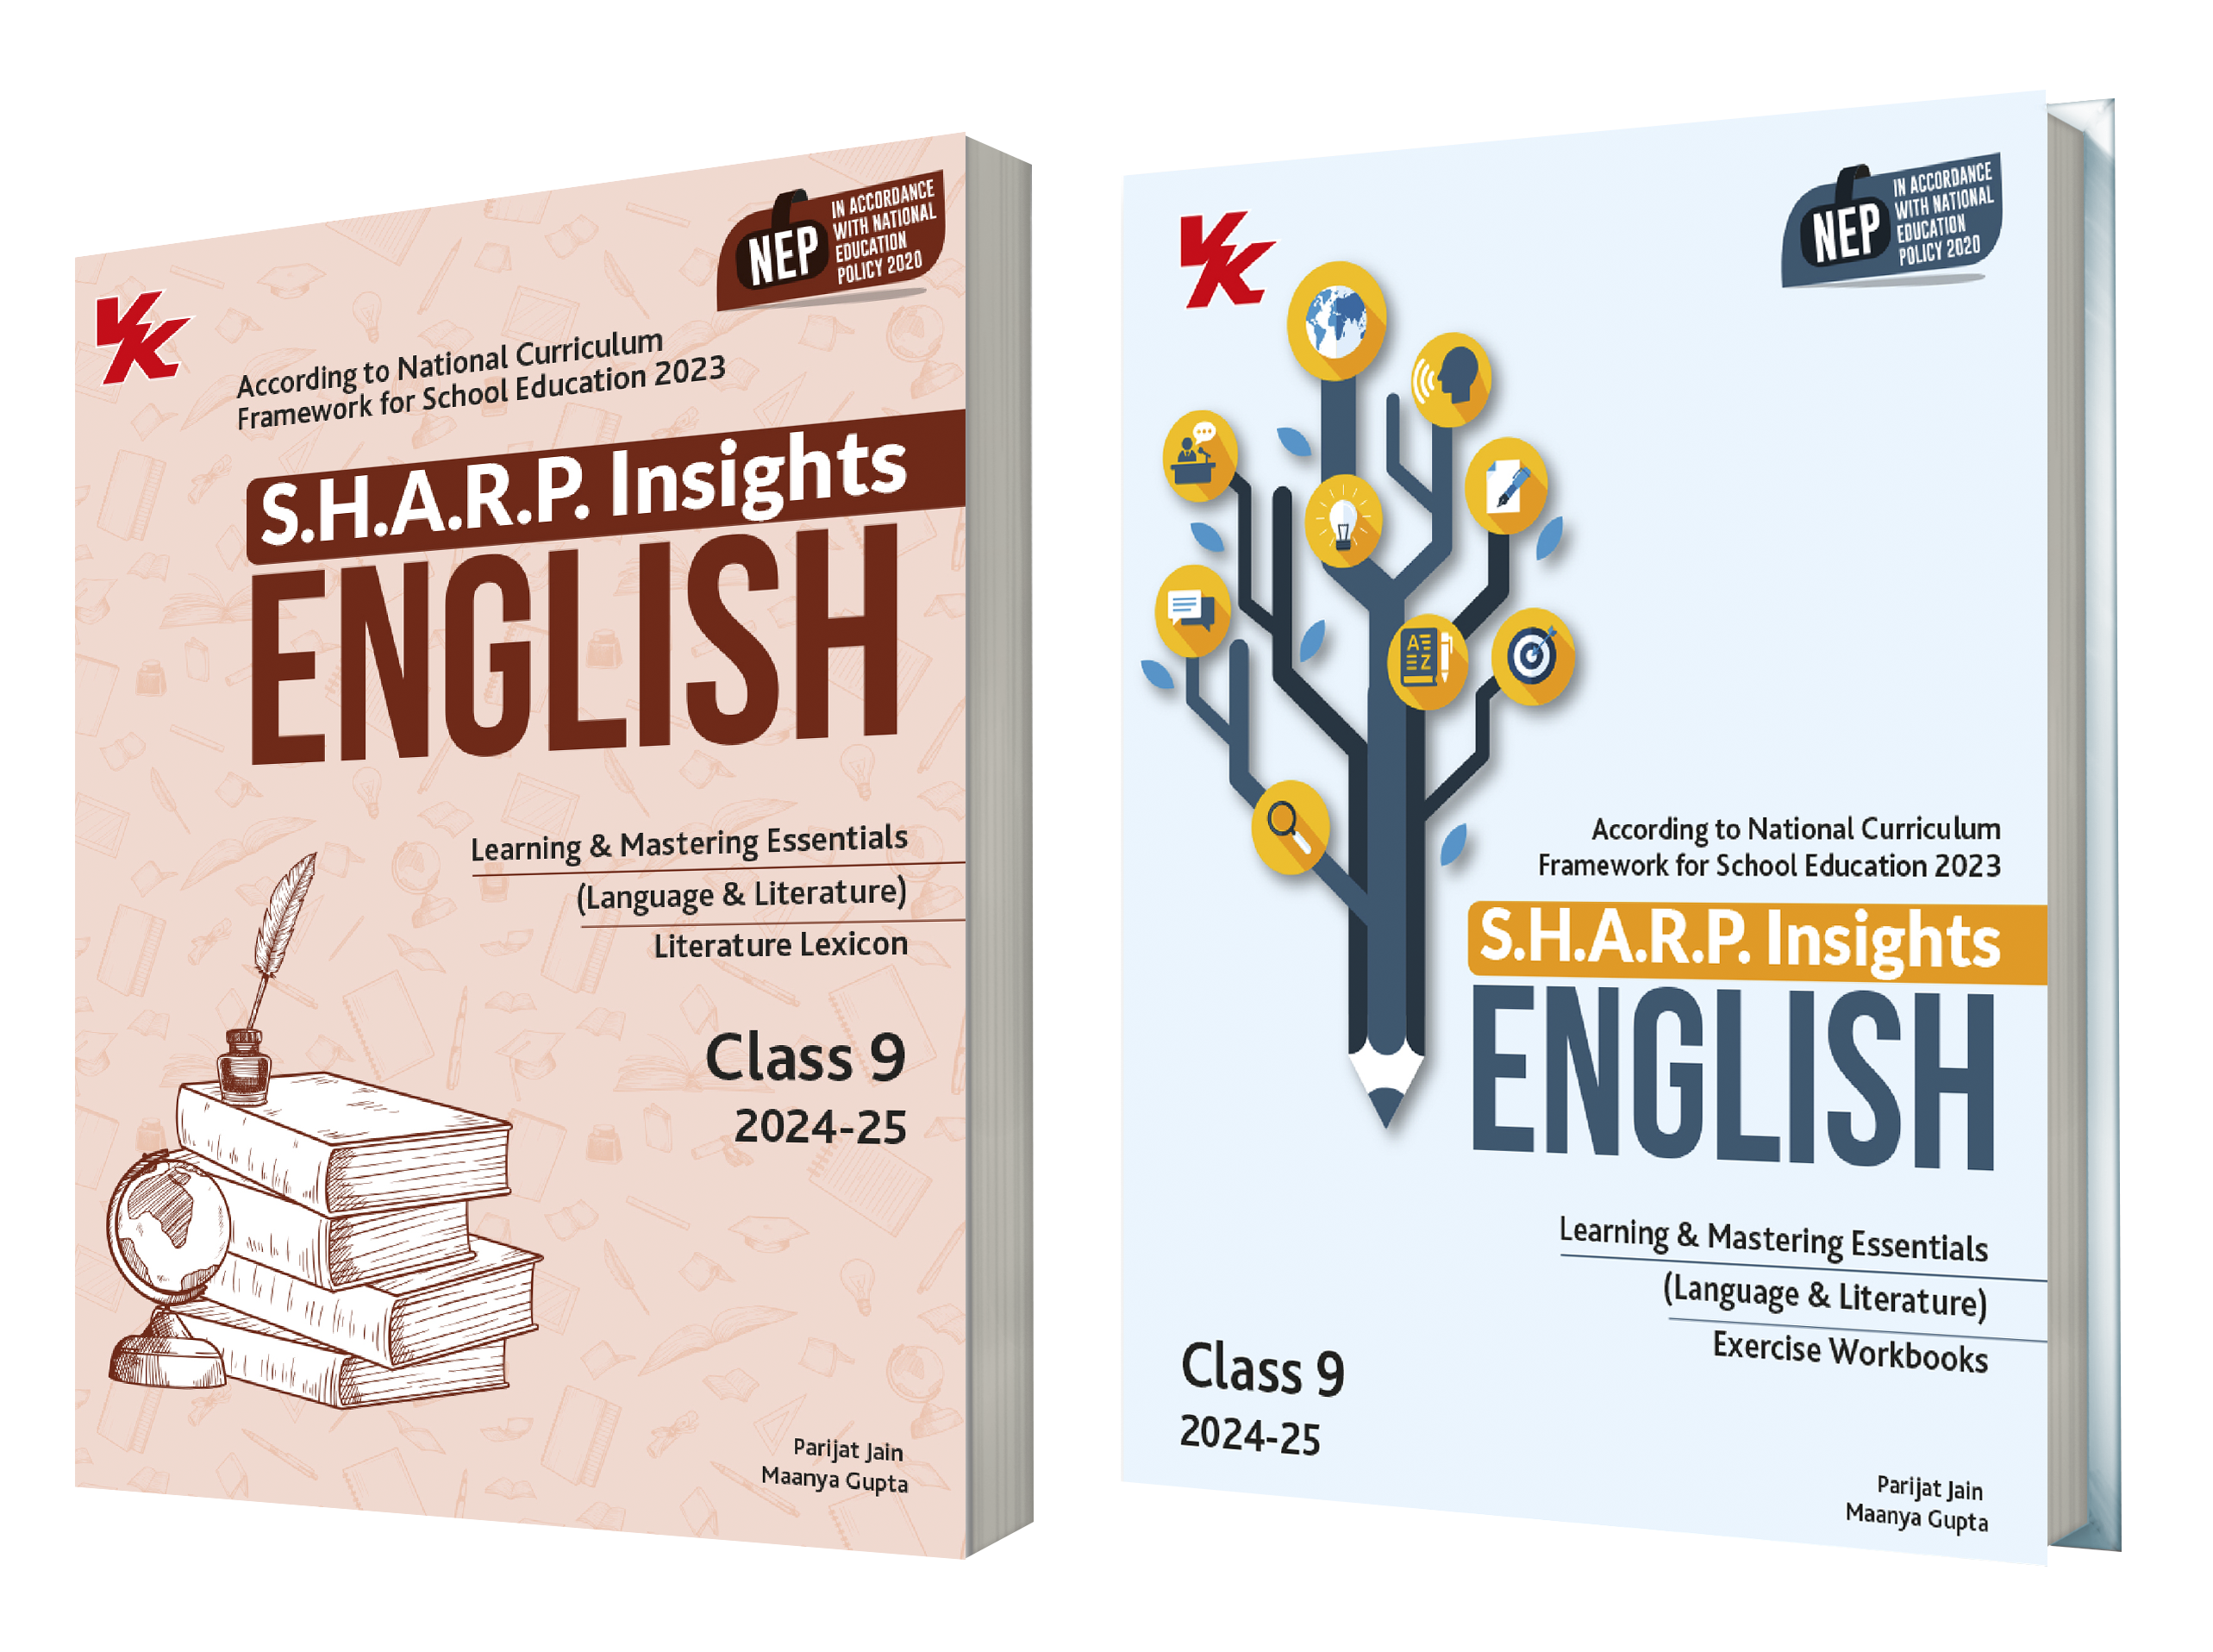 S.H.A.R.P. Insights for English Literature Lexicon with Exercise Workbooks for Class 9 CBSE 2024-25 (Set of 2 ) by Parijat Jain (IIT-D,IIM-A) & Maanya Gupta (IIM-A) by VK